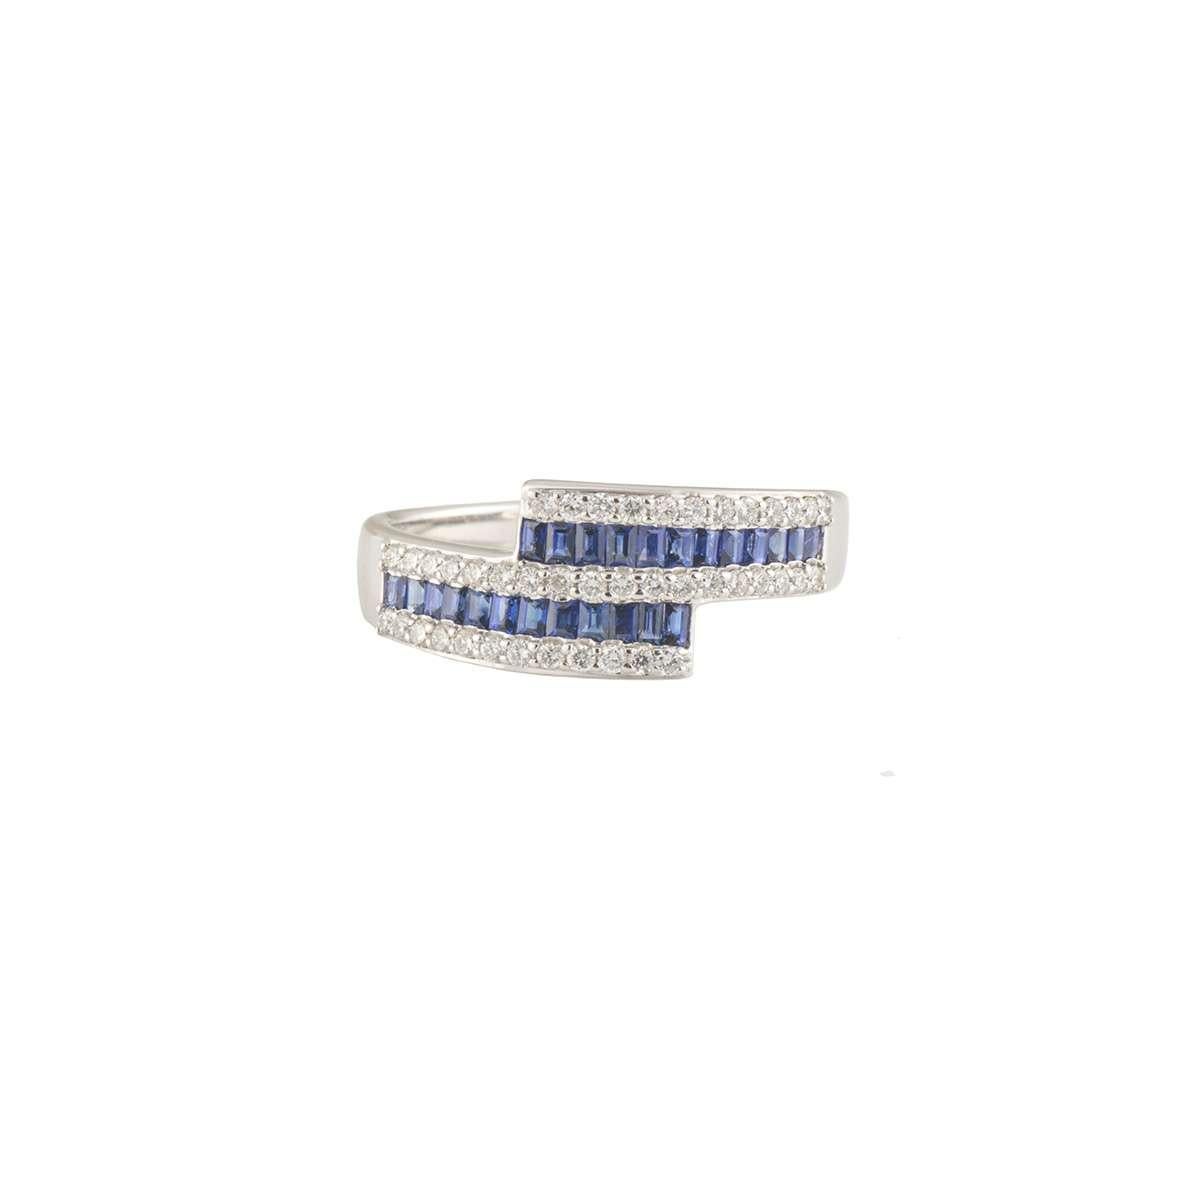 A beautiful 18k white gold diamond and sapphire crossover dress ring. The ring comprises of 3 rows of round brilliant cut diamonds alternating with 2 rows of baguette cut sapphires. The diamonds have a total weight of 0.25ct, G-H colour and VS-VVS